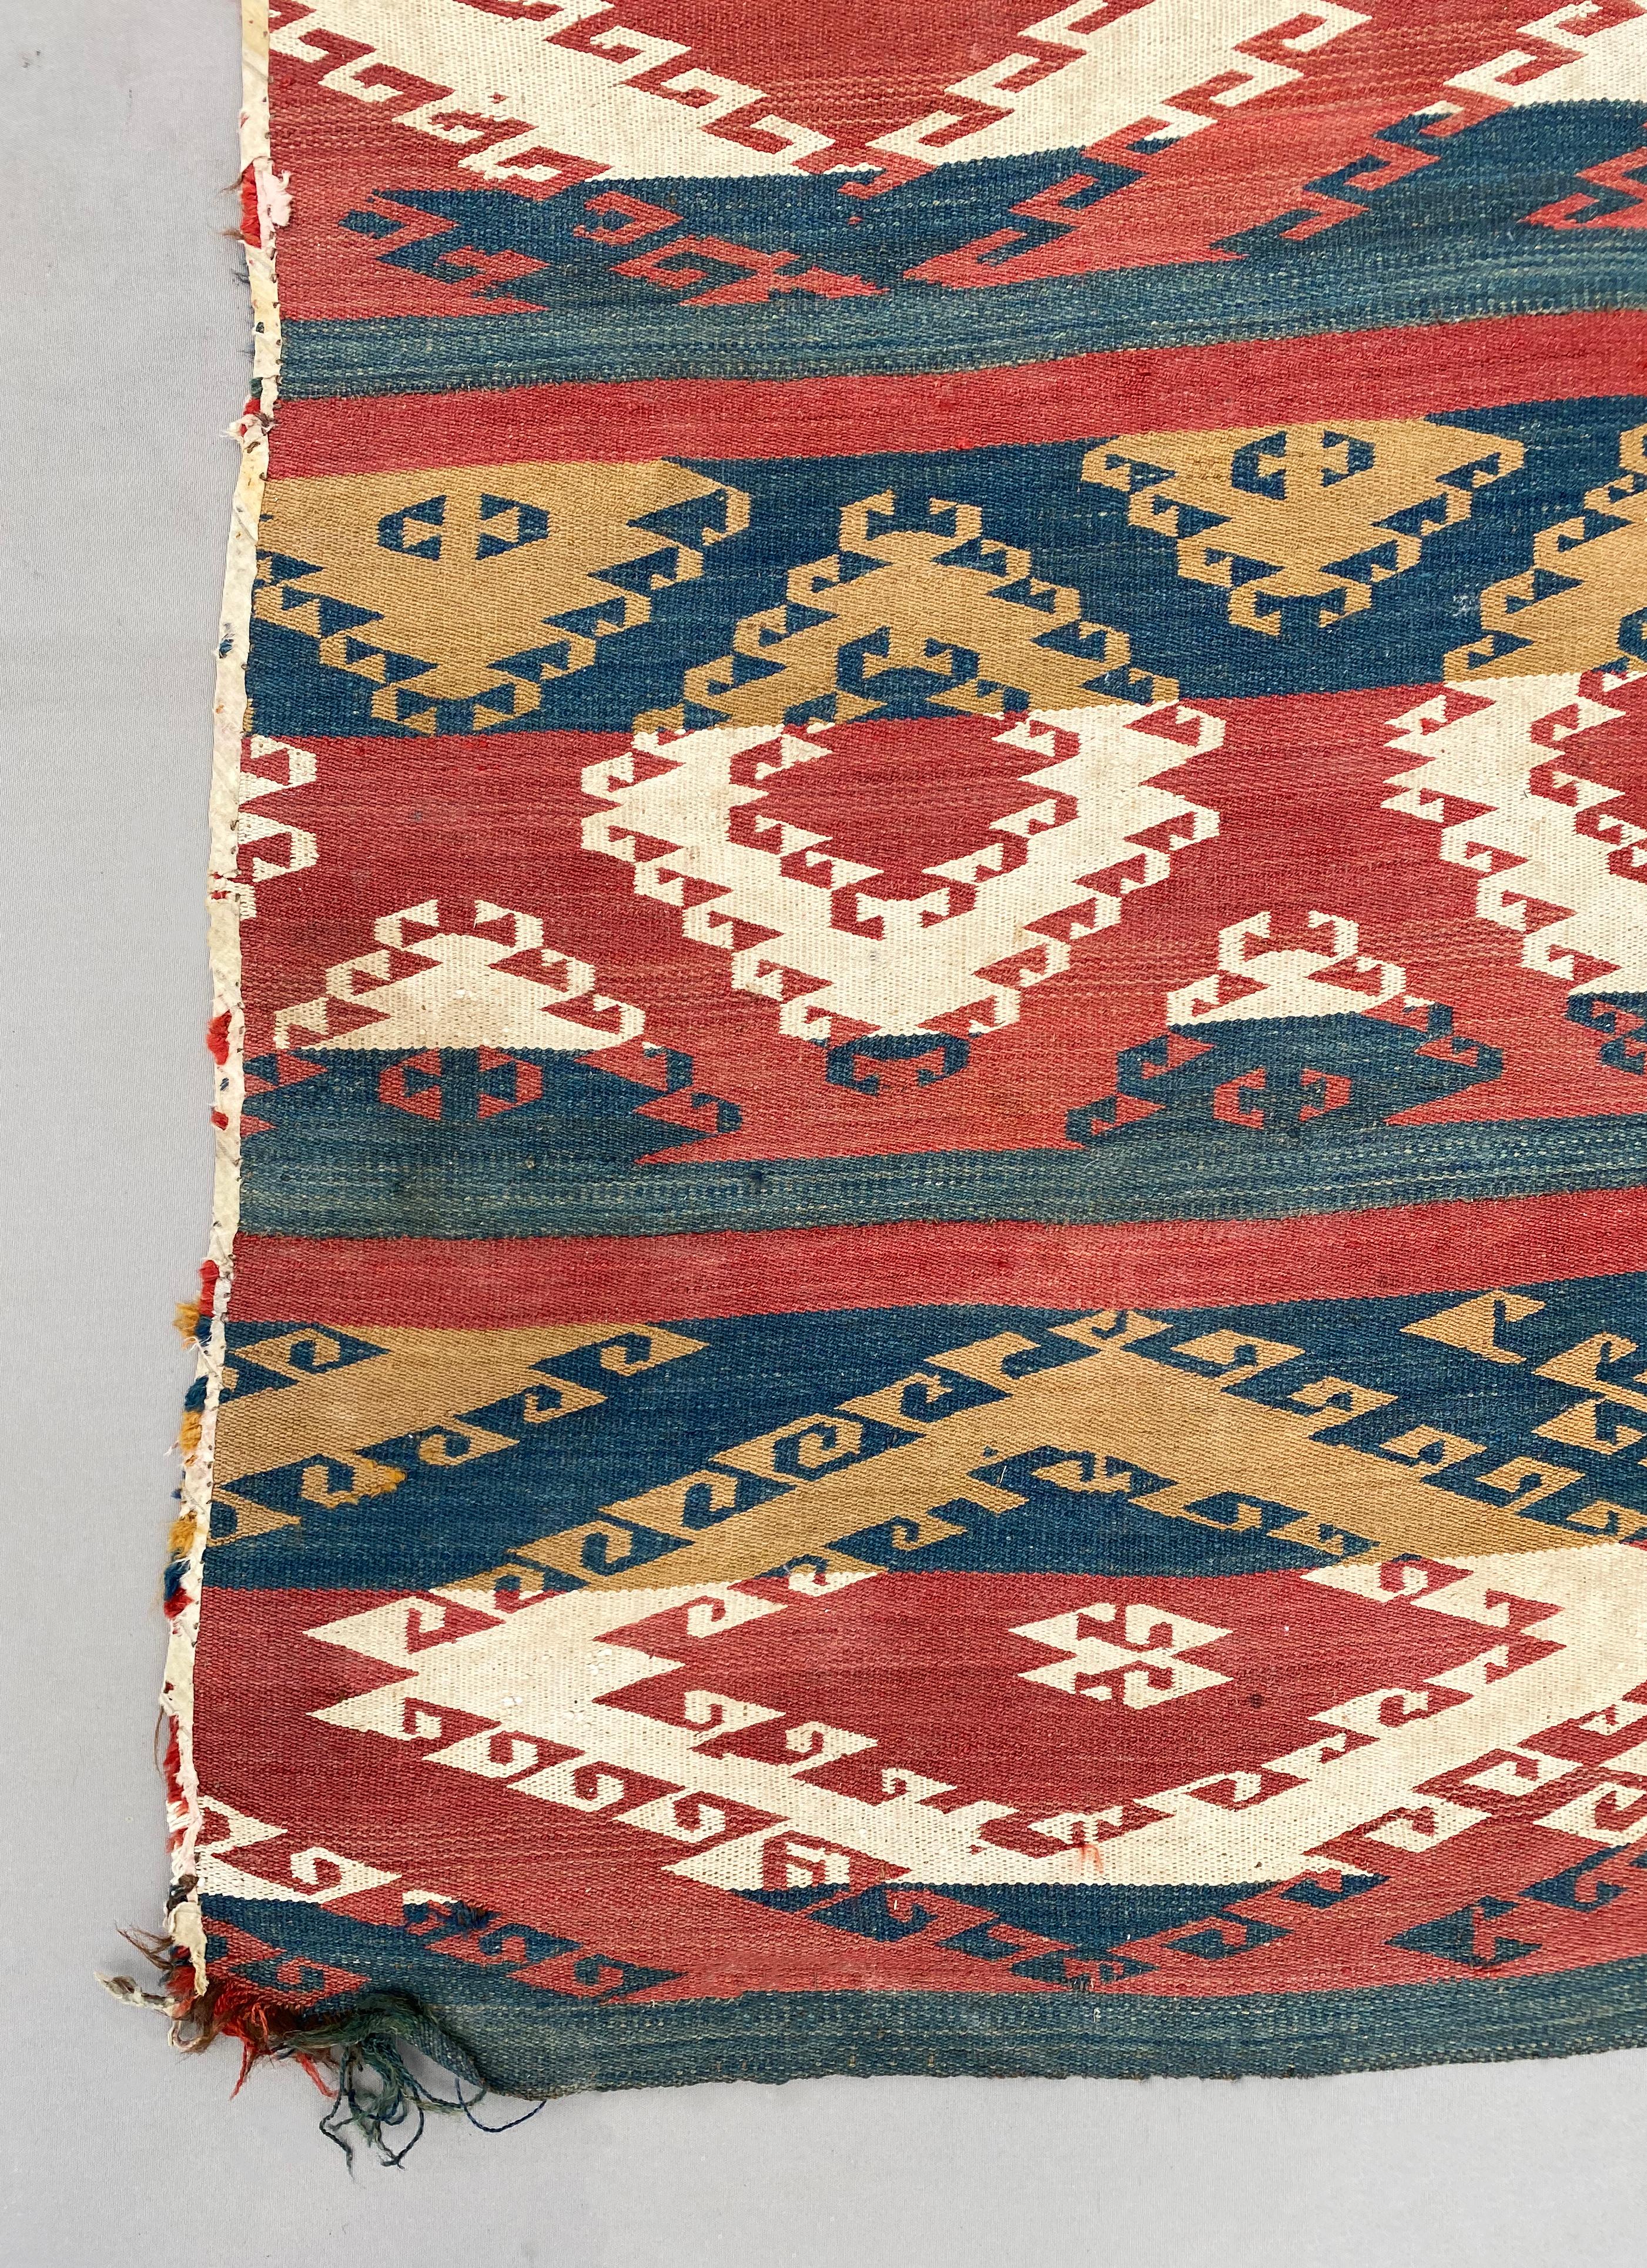 Hand-Knotted Uzbekistan Ghudjeri Tribal Kilim Rug from Wool, Room Size, Early 20th Century For Sale